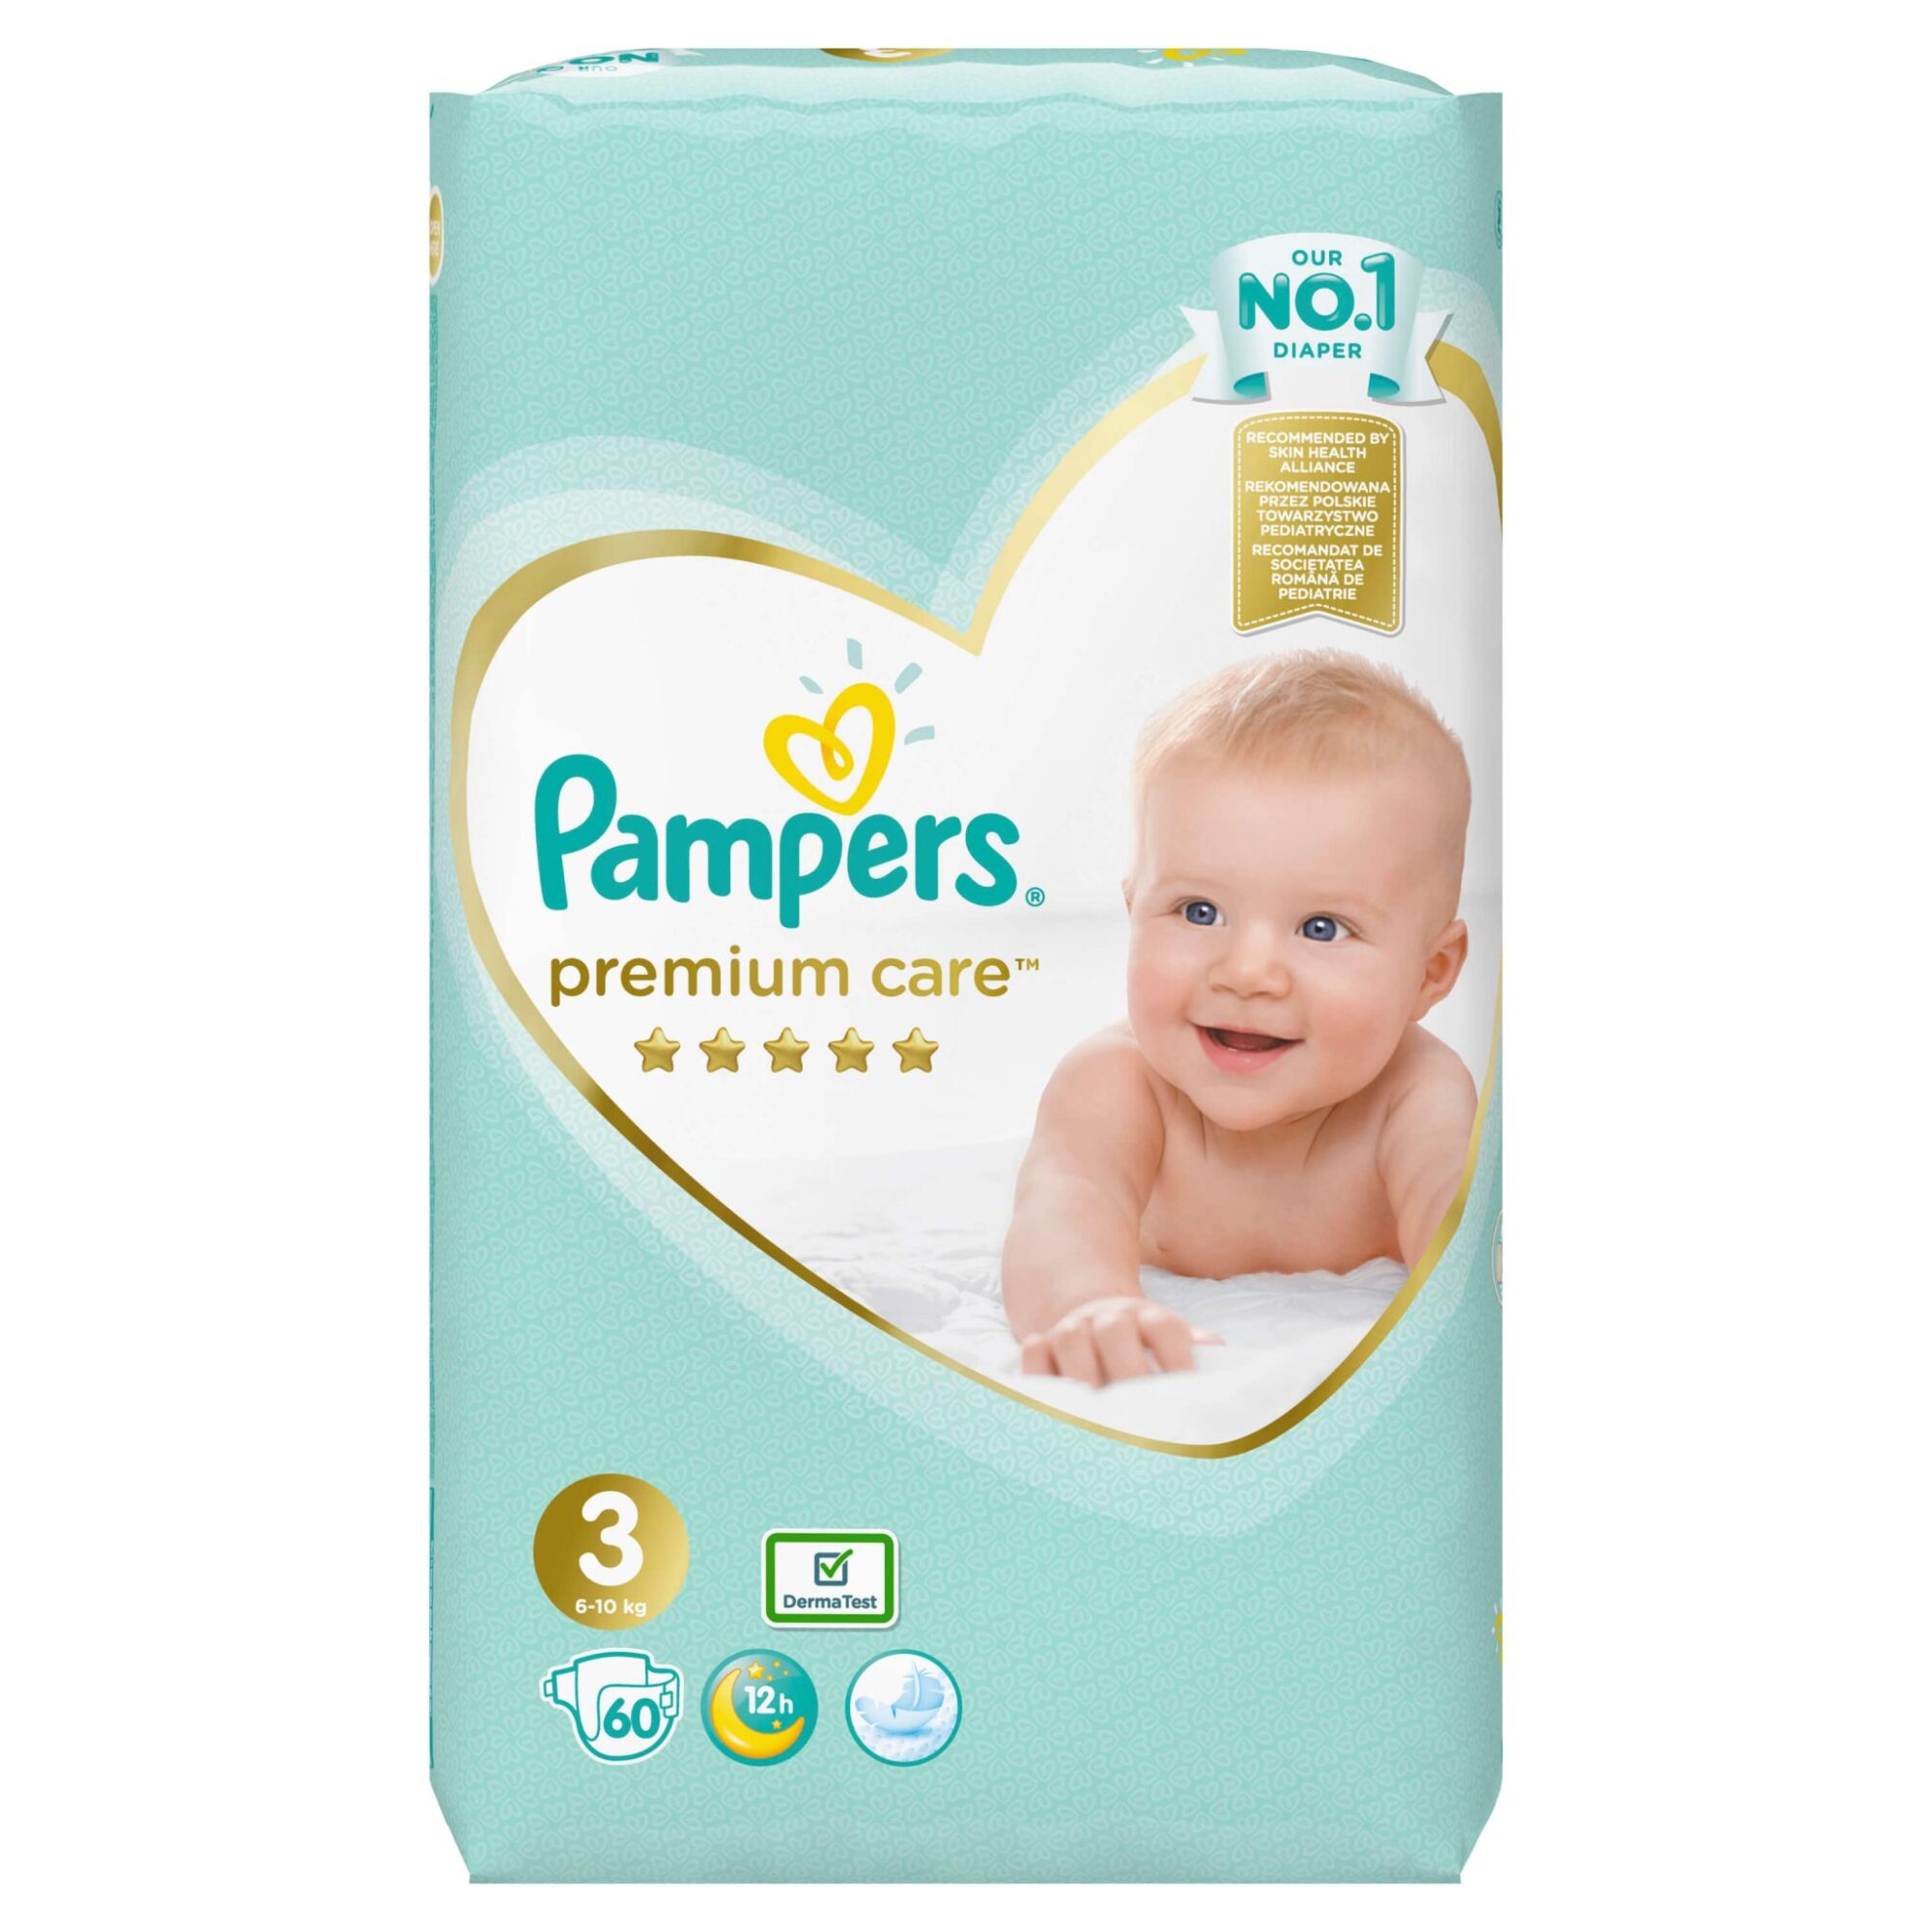 pampers_premium_size_no3_paidikes_panes_znzmedical